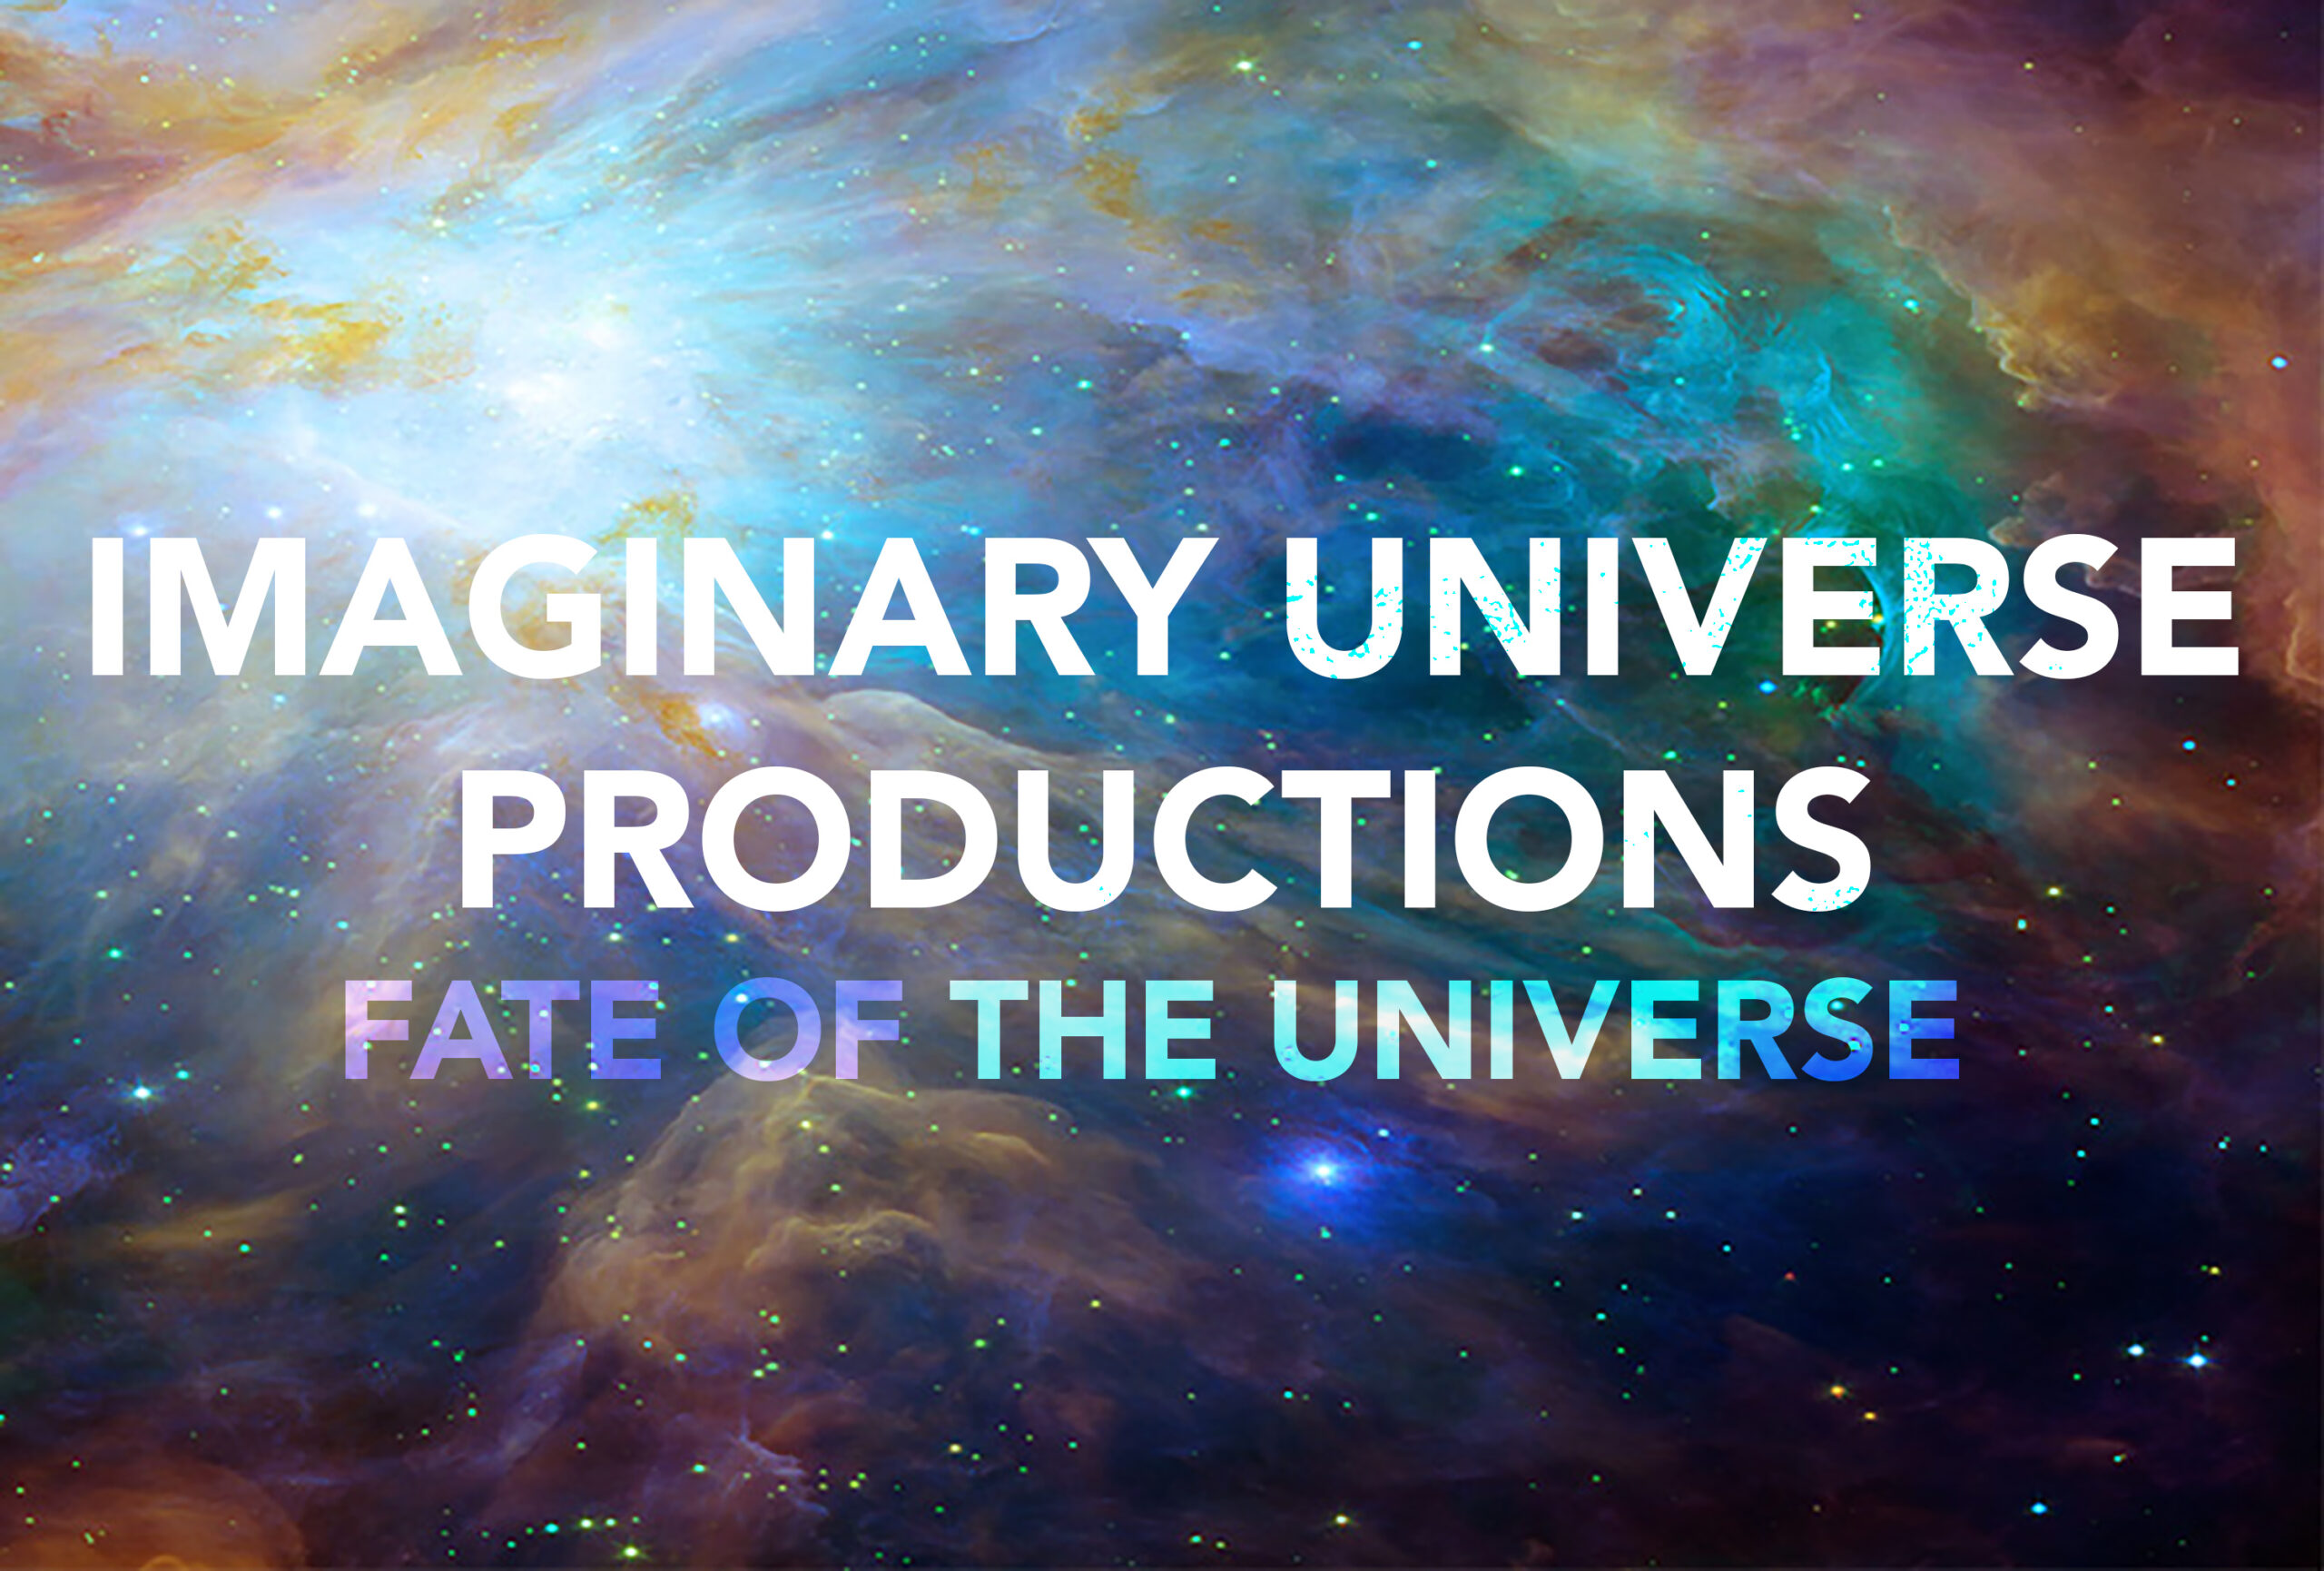 Imaginary Universe is our January Qualification Grant Winner!